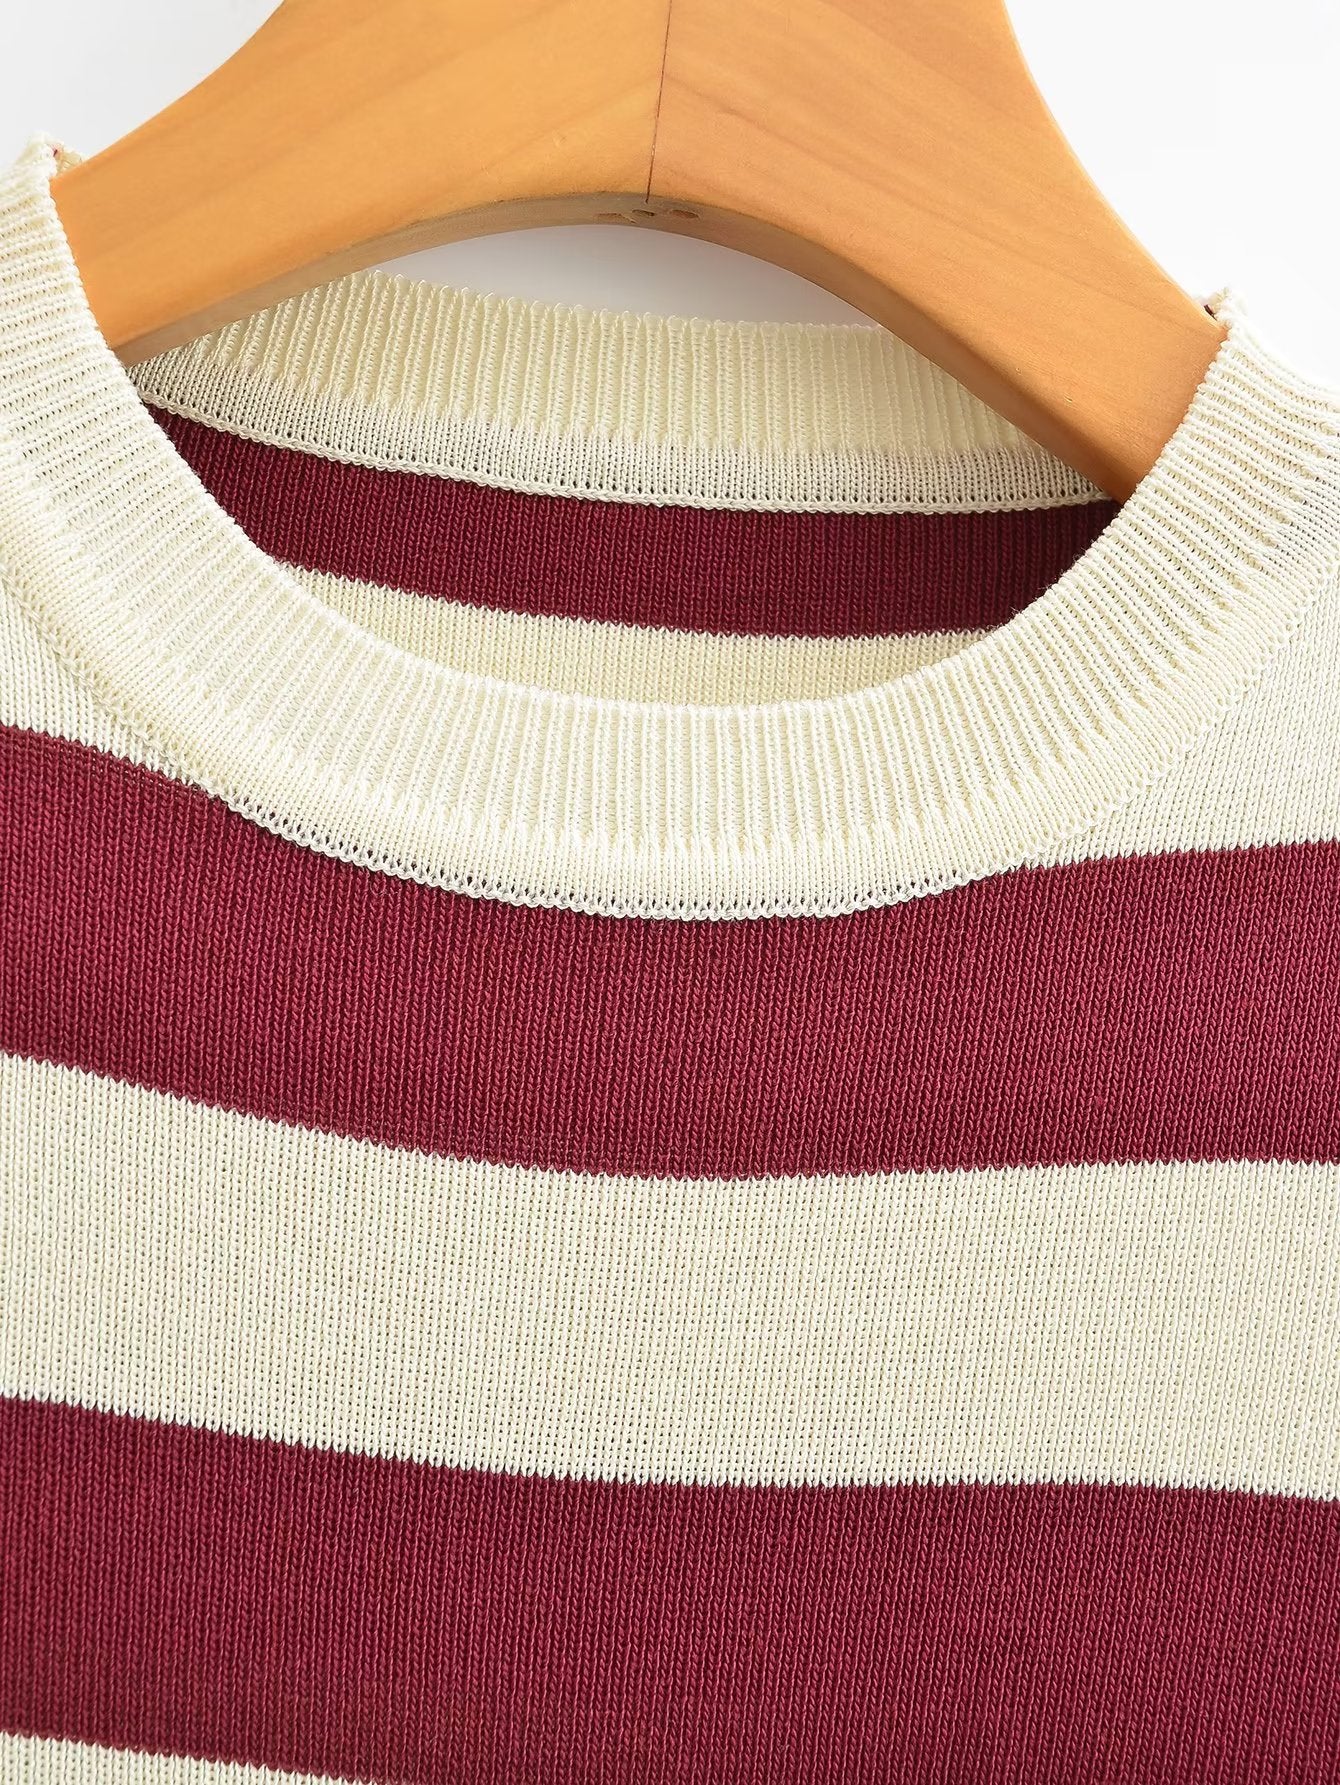 Round Neck Striped Long Sleeve Crop Top